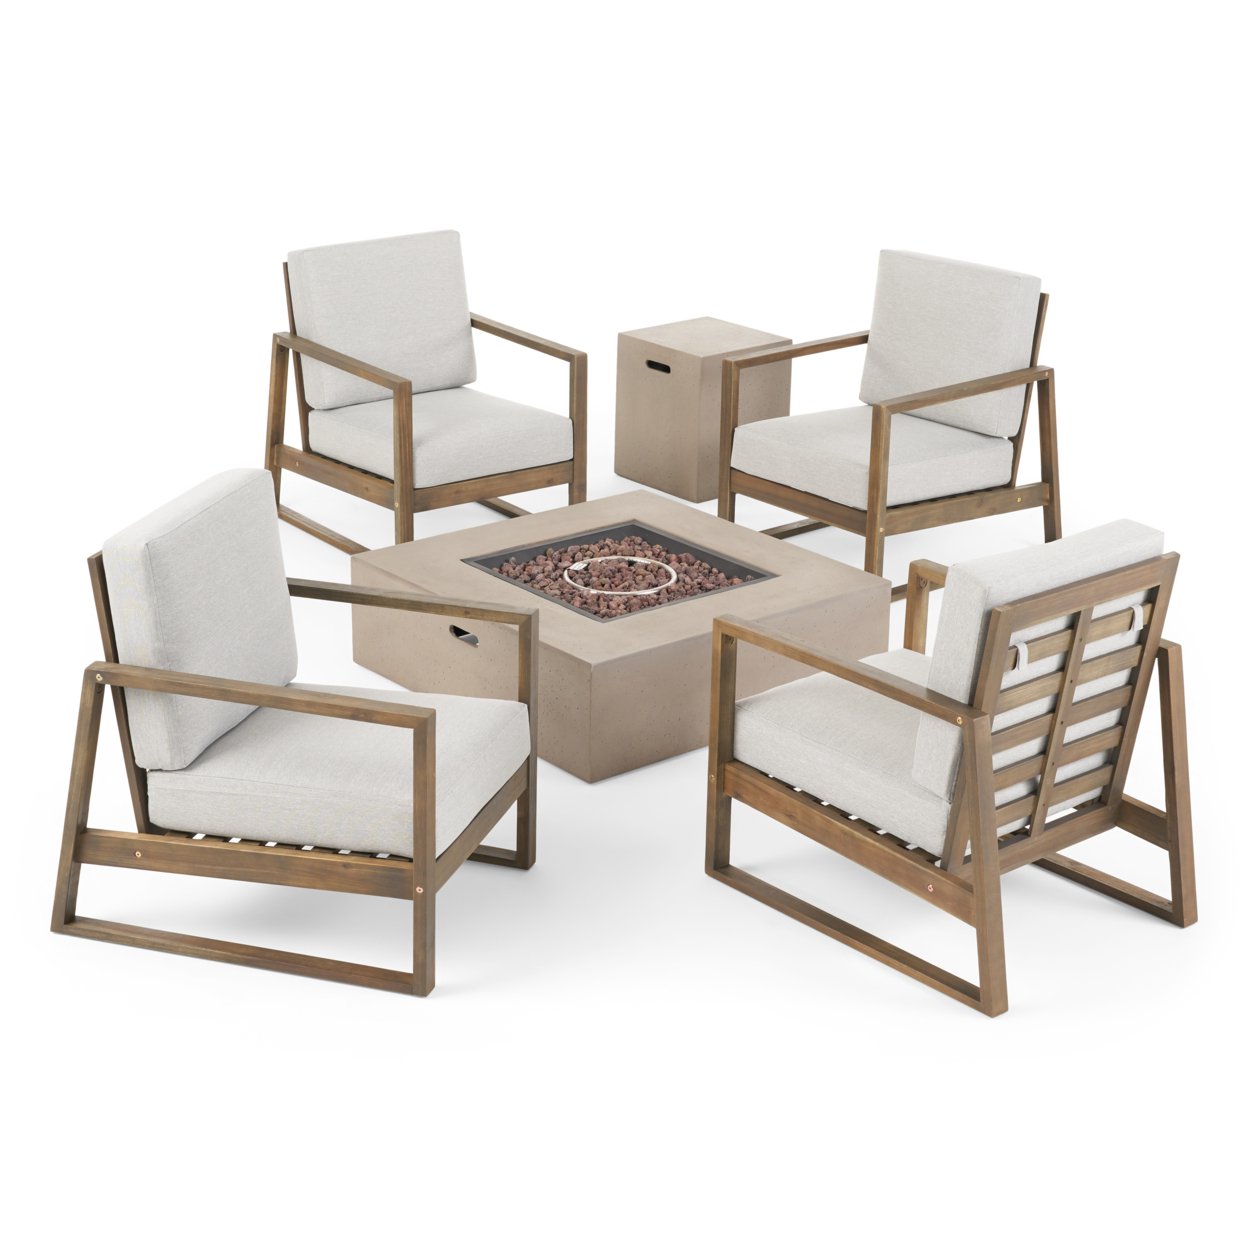 Leila Outdoor 4 Seater Chat Set With Fire Pit - Teak Finish + Beige + Light Gray